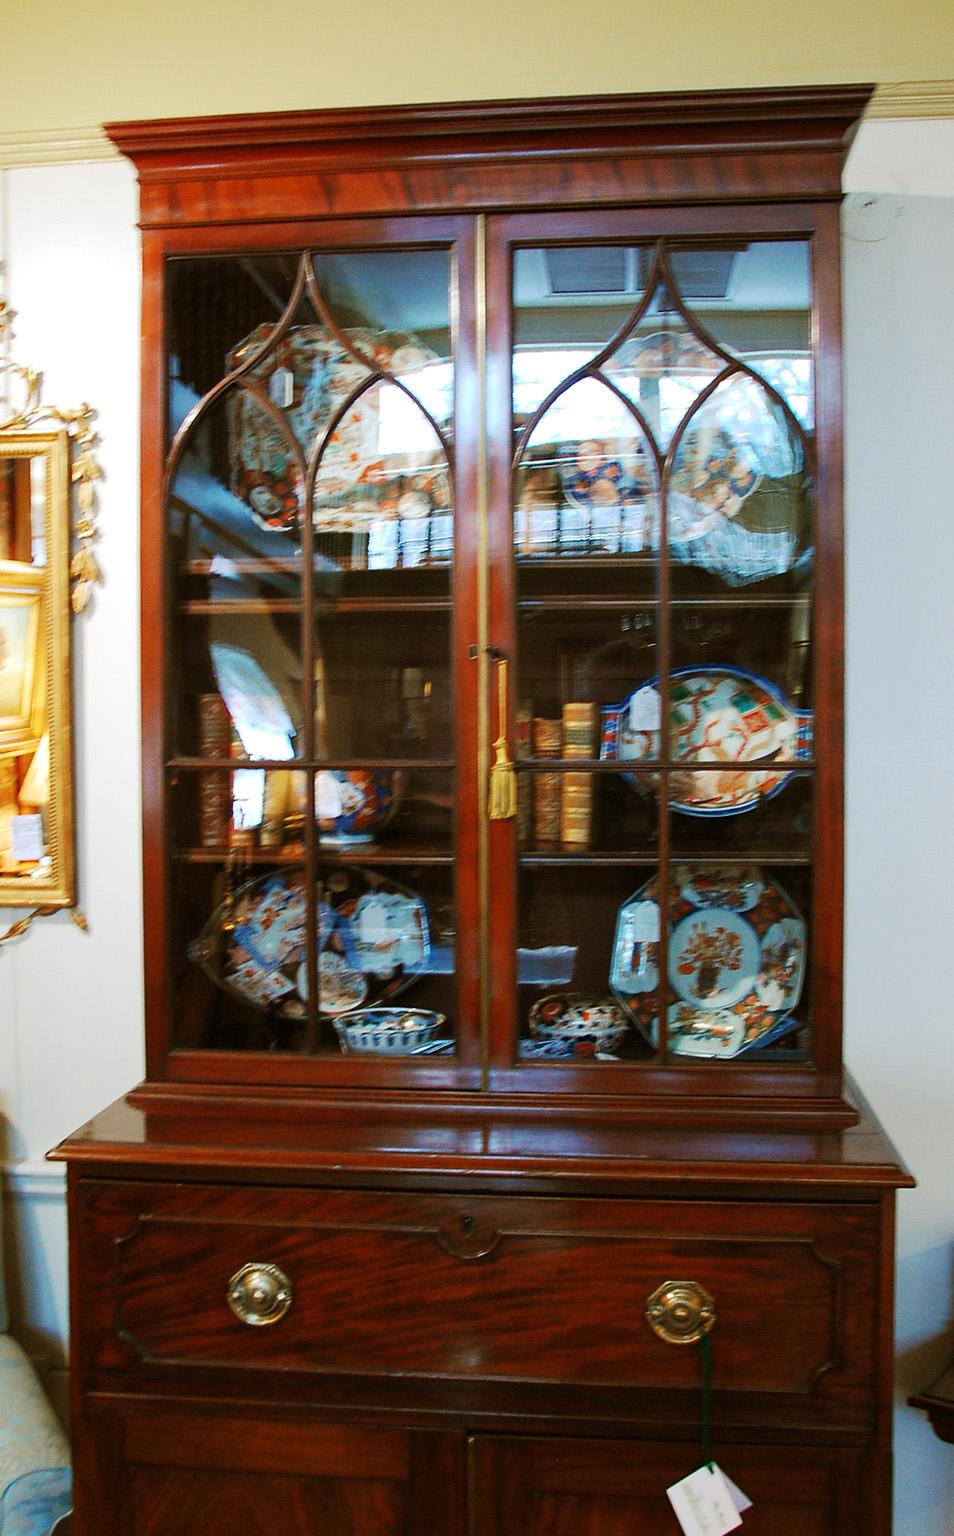 English George III Hepplewhite mahogany secretaire bookcase in two parts with secretaire drawer, cupboards and astragal molded glazed doors. The two glazed doors with arched astragal glazing enclose three adjustable molded edge shelves. The